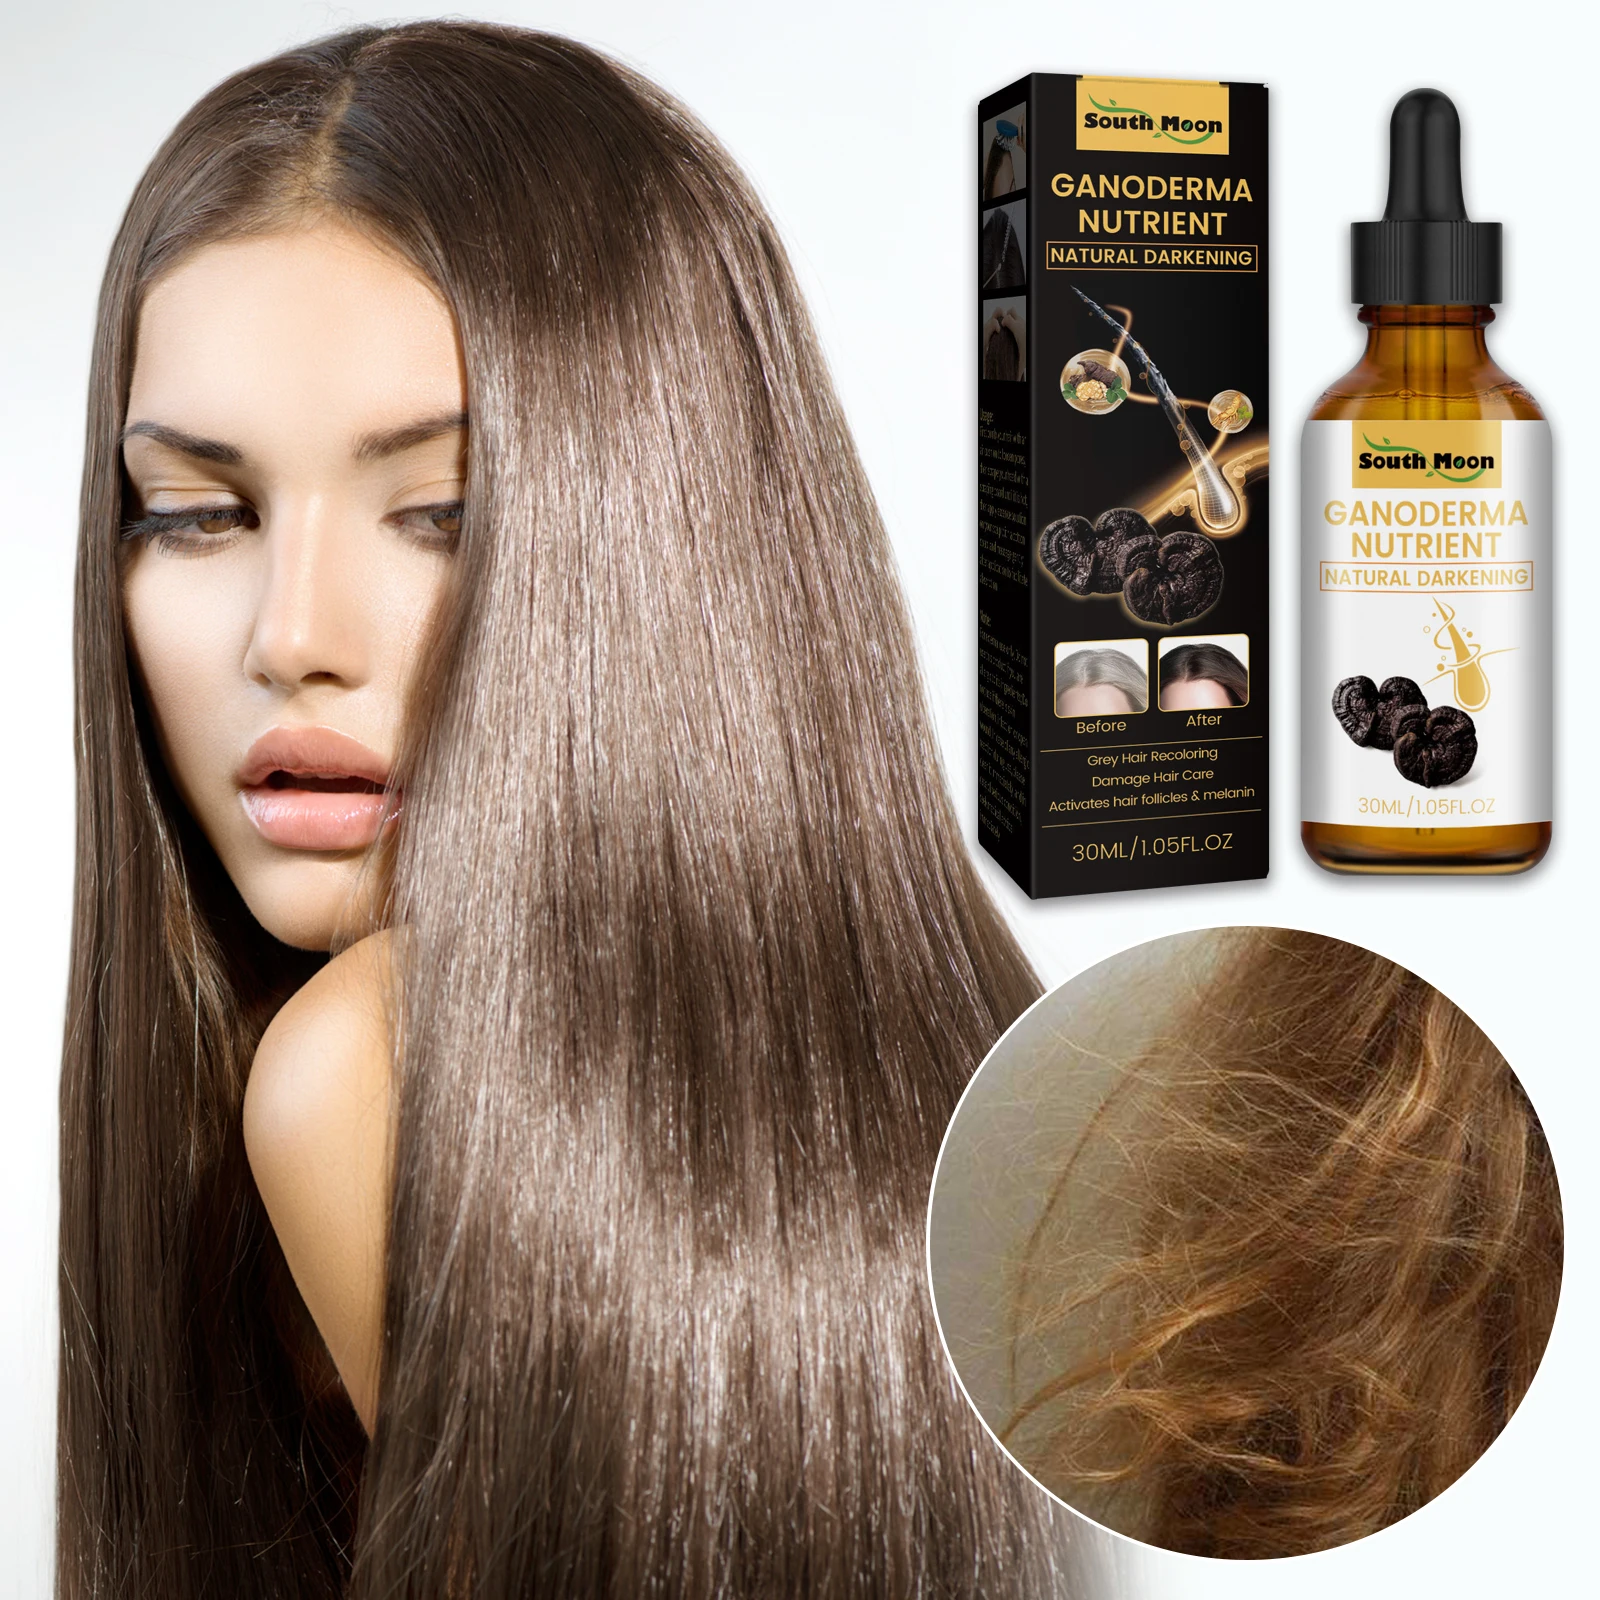 

Hair Growth Products Rosemary Oil For Hair Loss Grow Fast Bio Essence Loss Treatment Oils Biotin For Hair Growth Fast Shipping